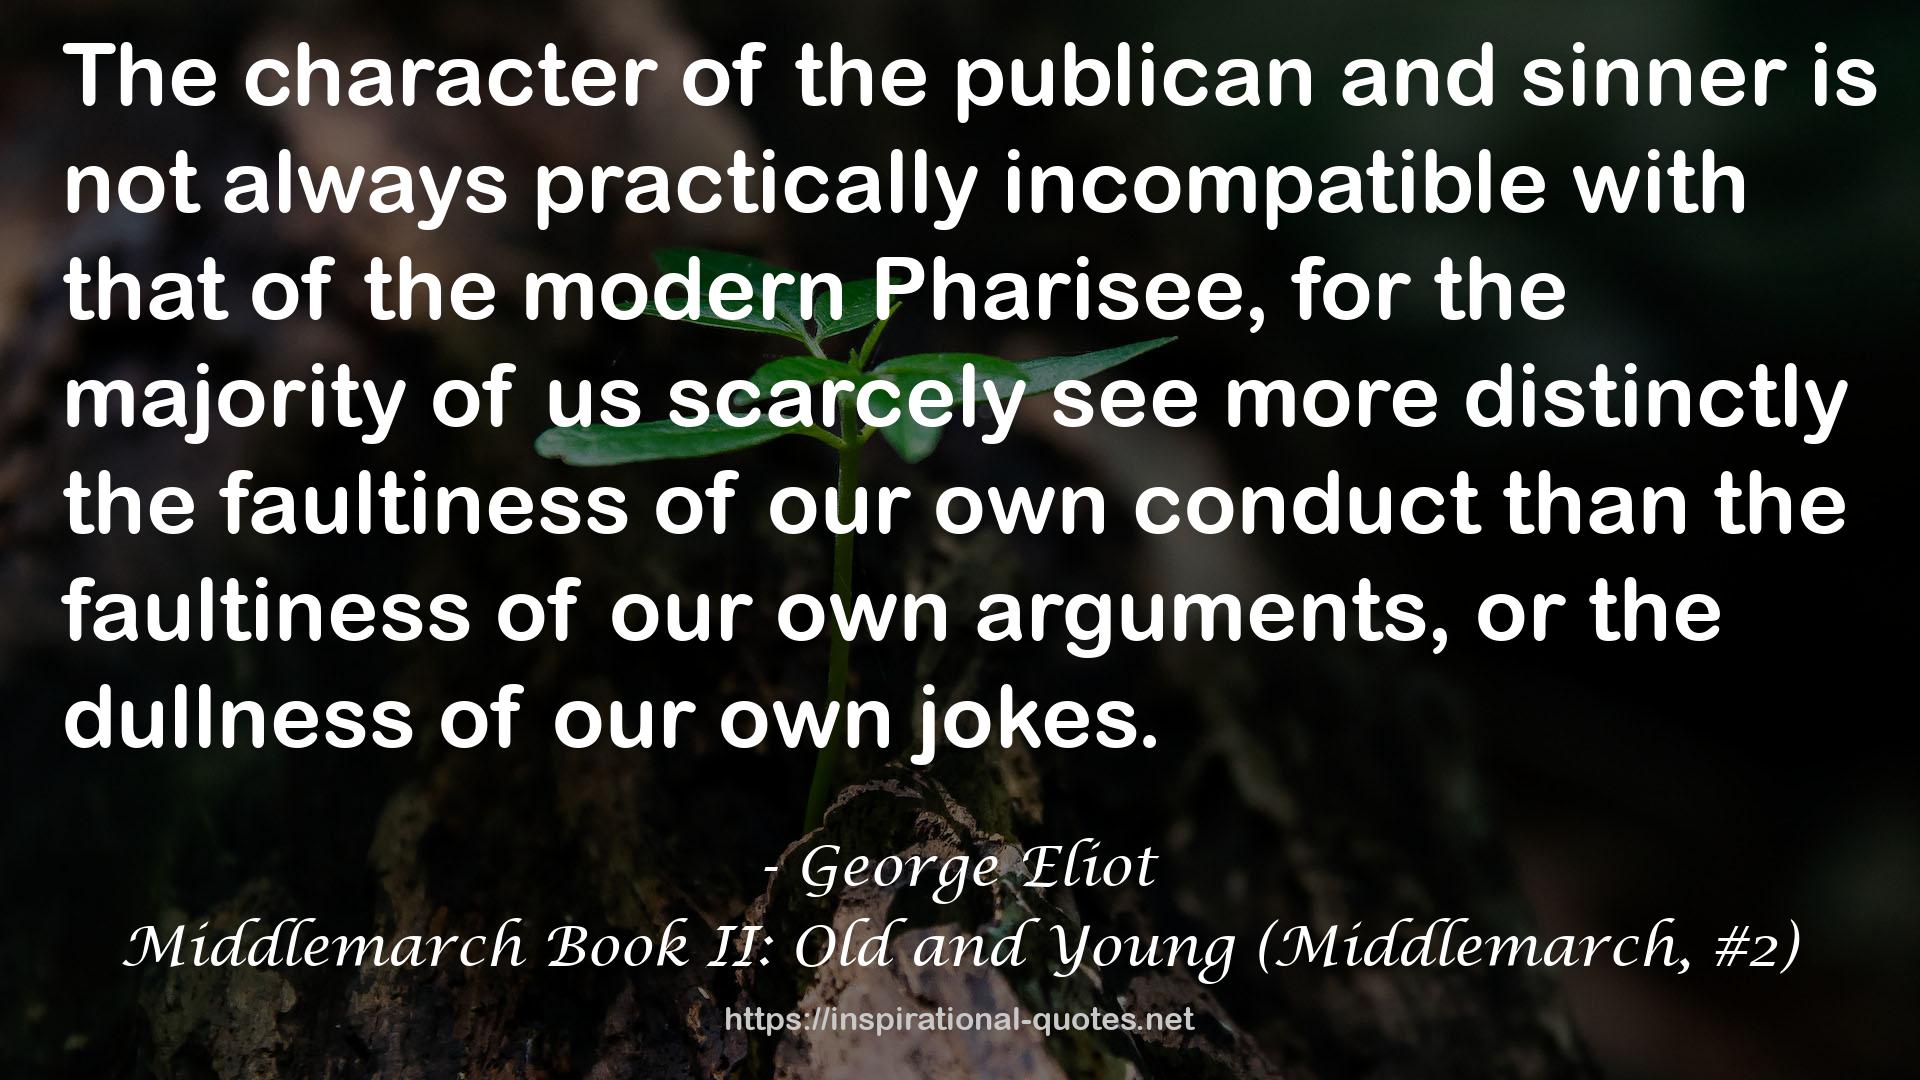 Middlemarch Book II: Old and Young (Middlemarch, #2) QUOTES